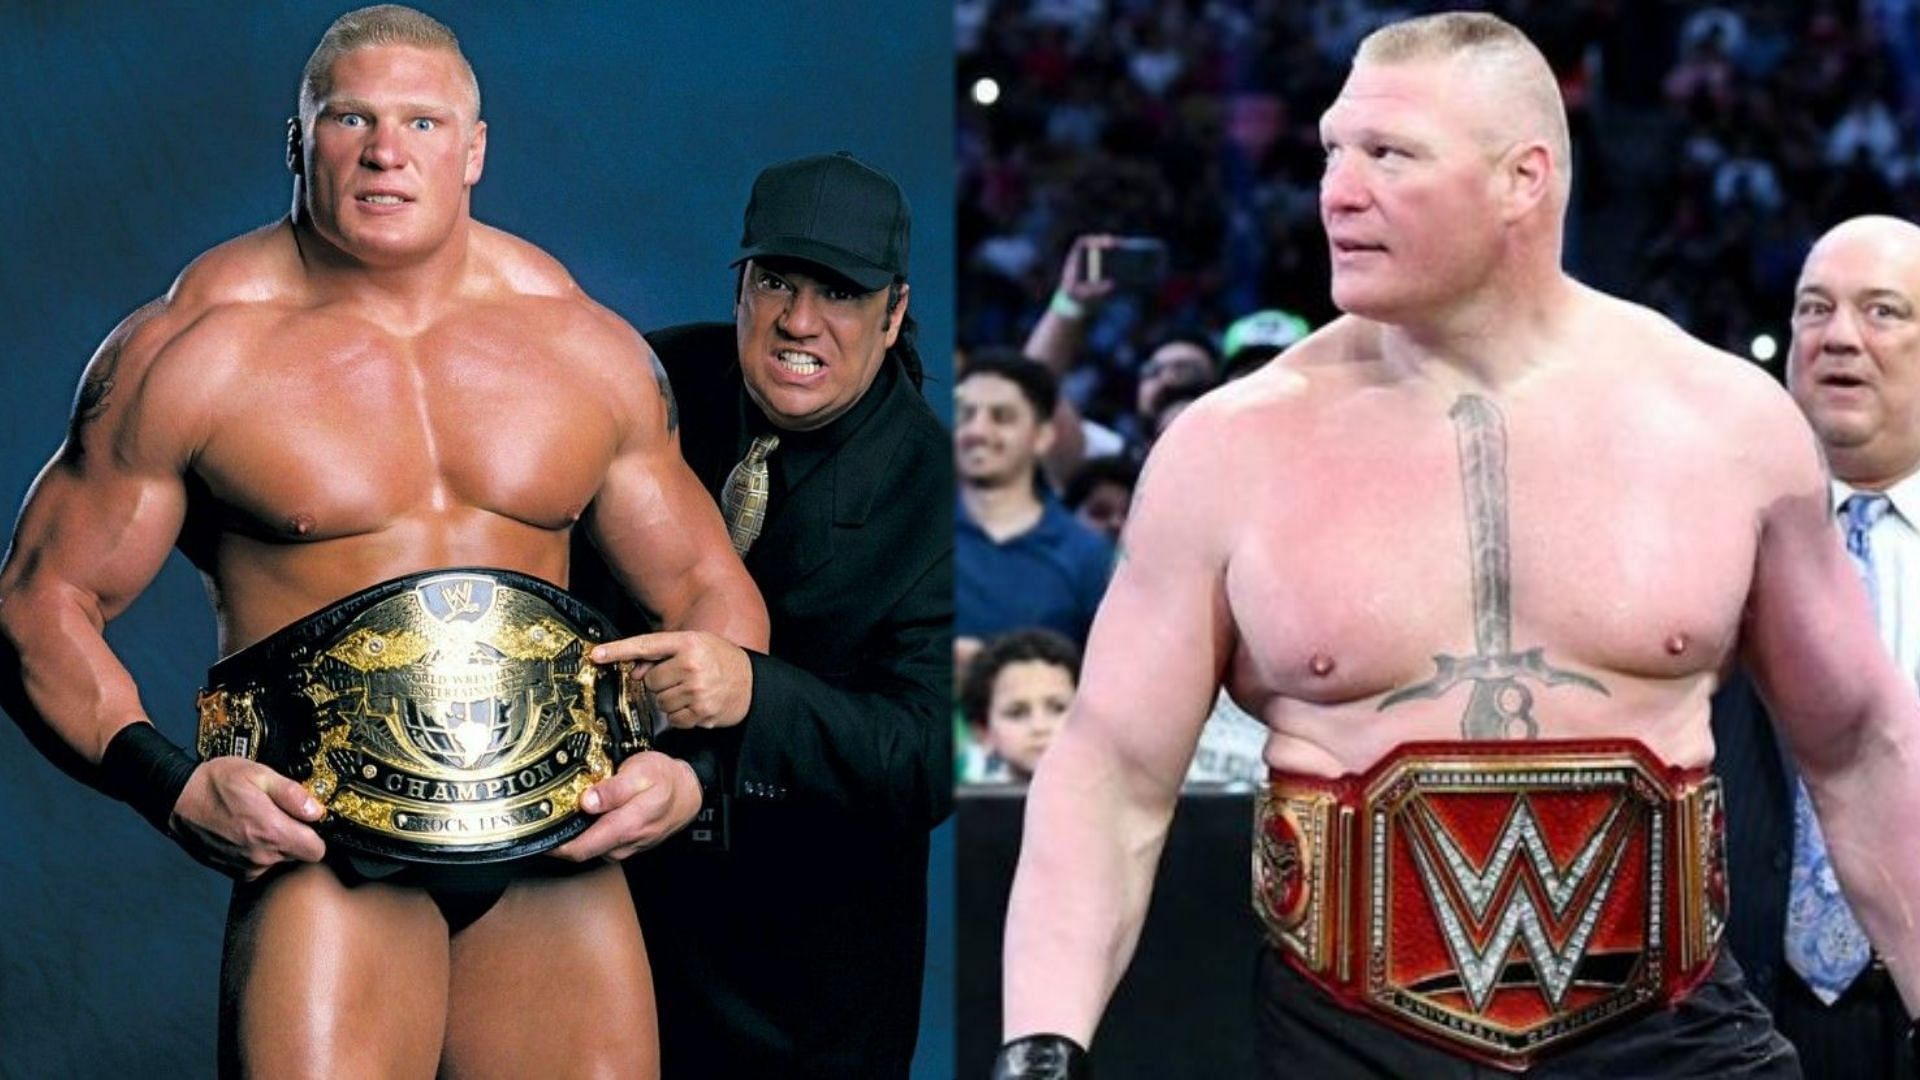 Brock Lesnar has had one of the most lucrative careers in pro wrestling.